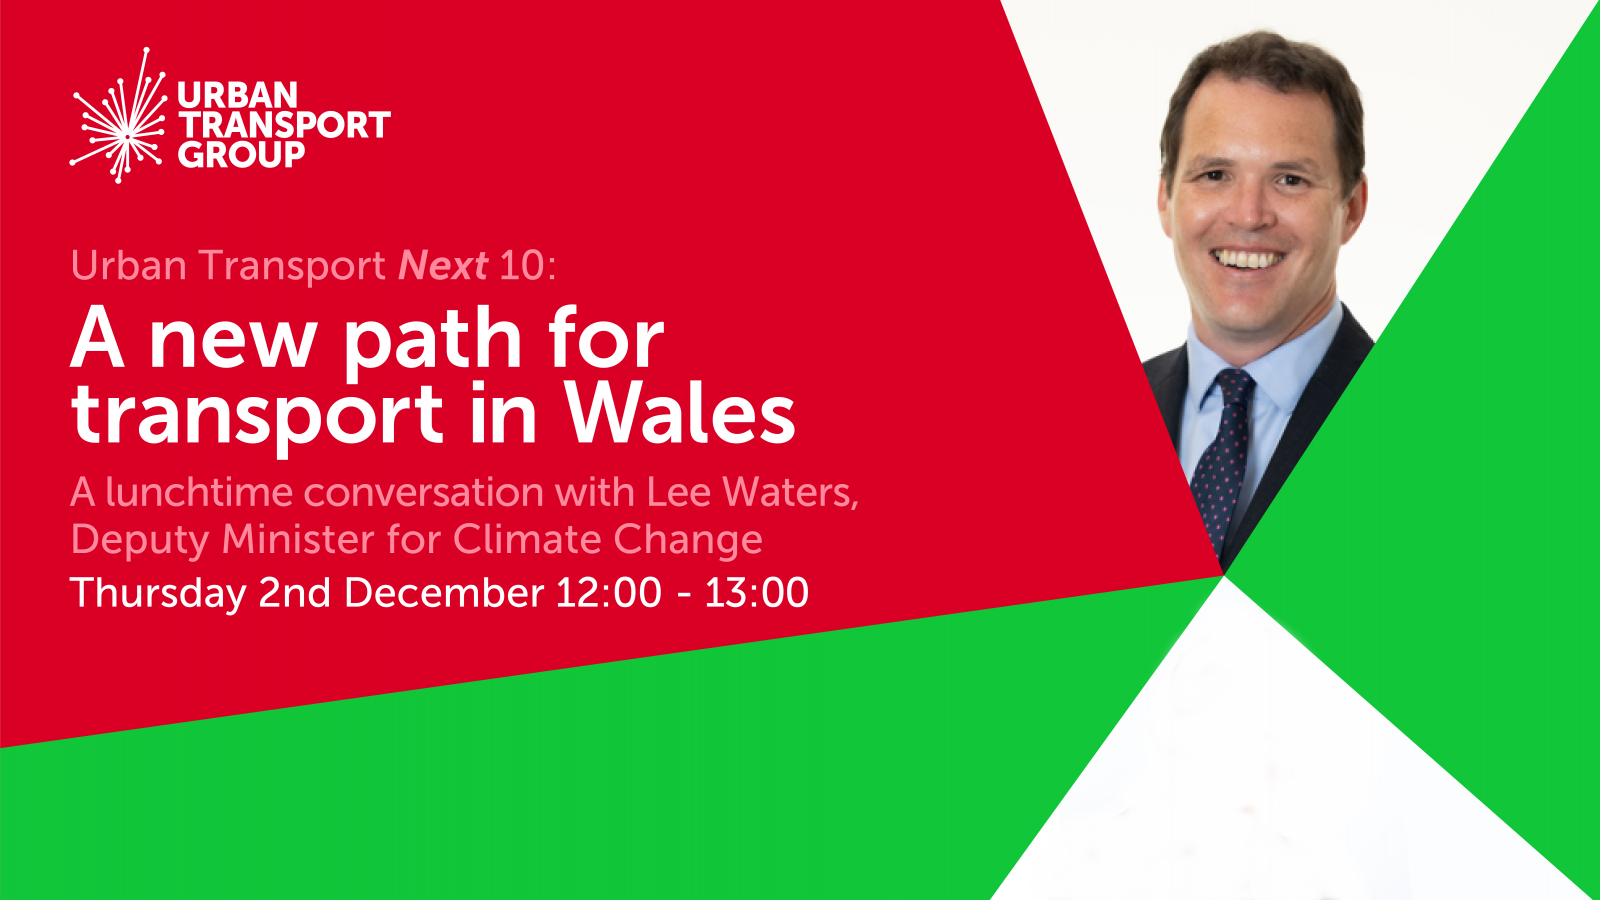 Urban Transport Next 10: A new path for transport in Wales visual